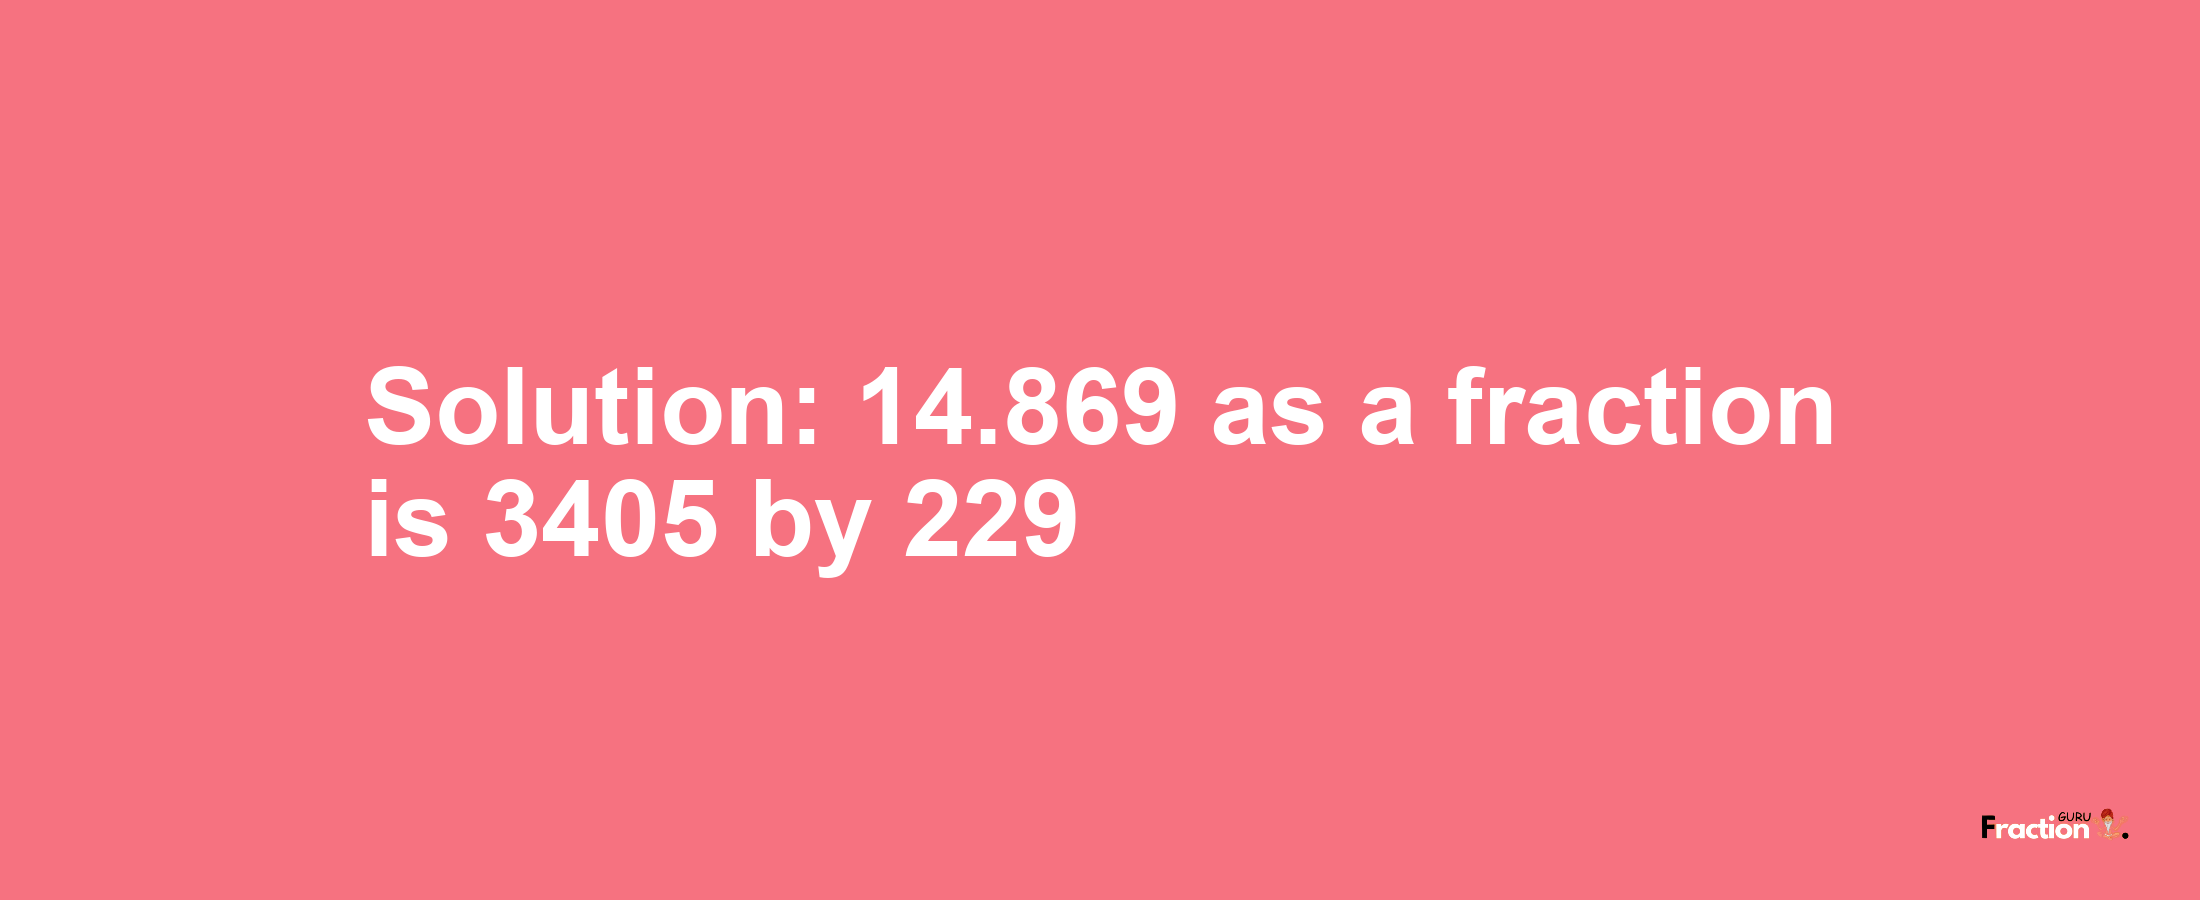 Solution:14.869 as a fraction is 3405/229